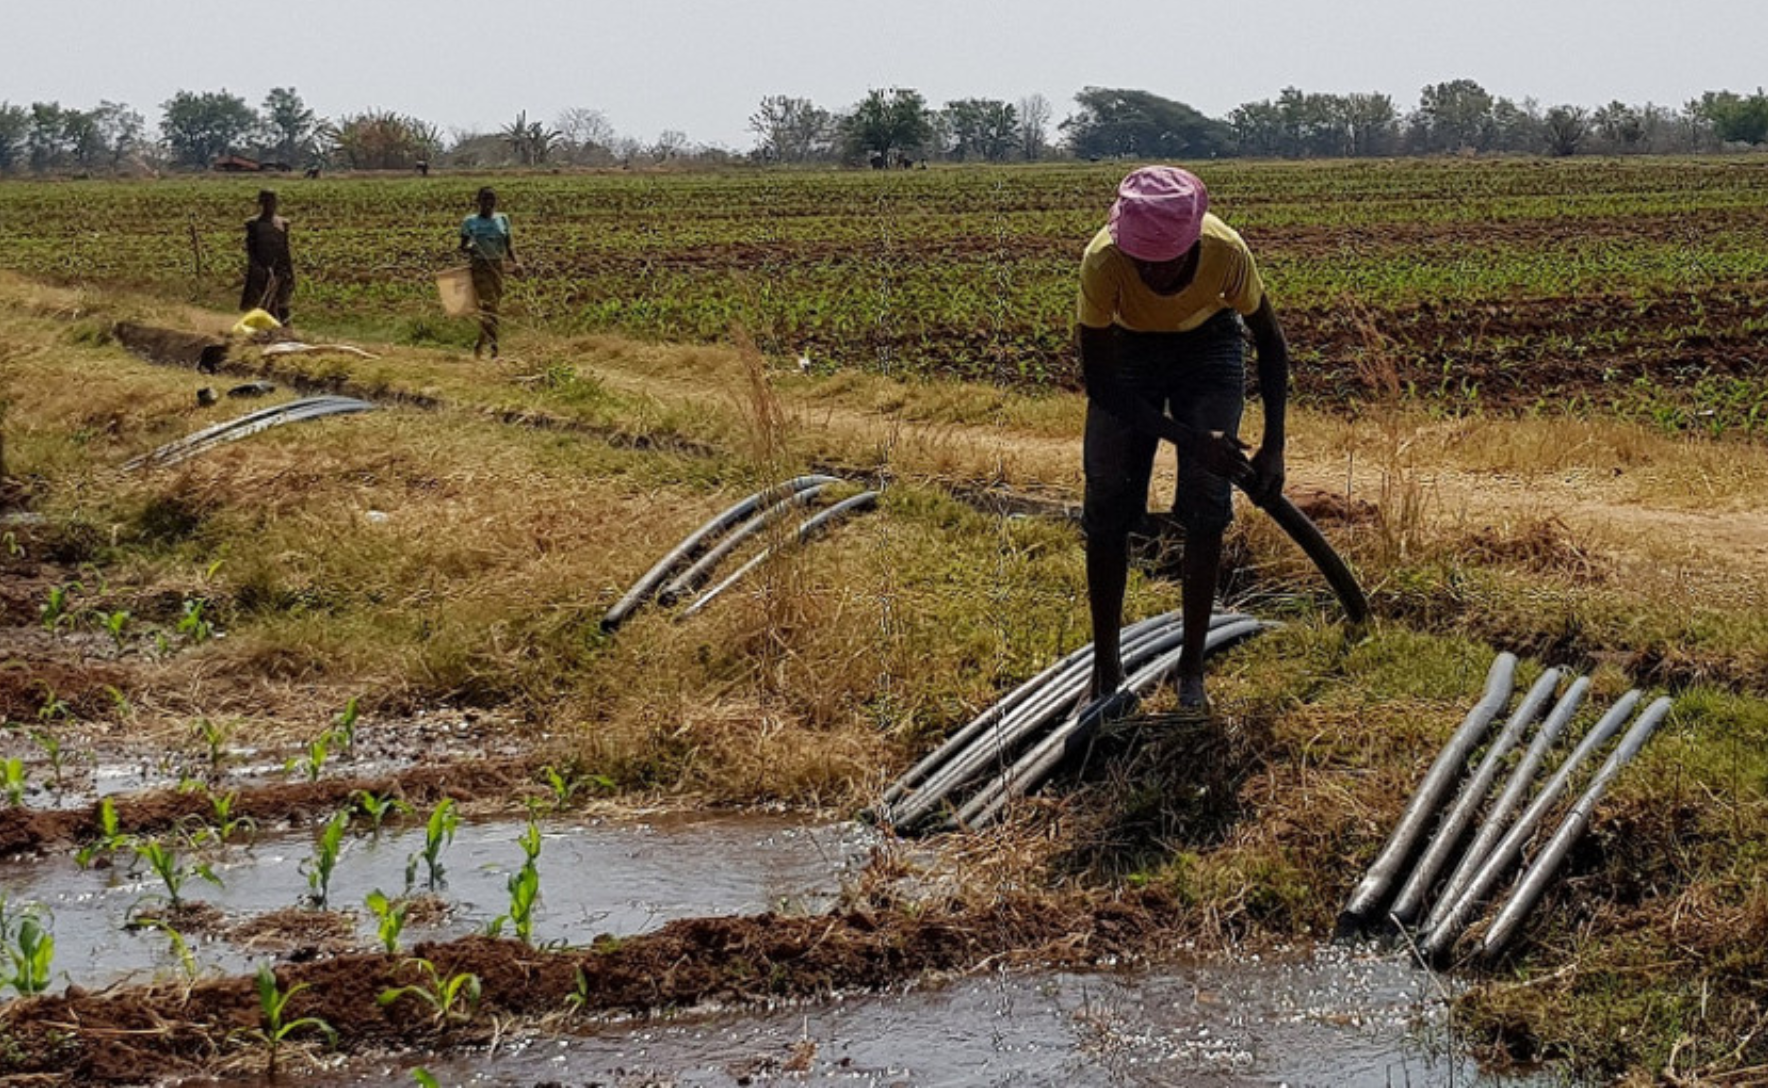 Three people are busy working in an irrigated field. The person in the foreground is holding a pipe and wearing a pink hat.